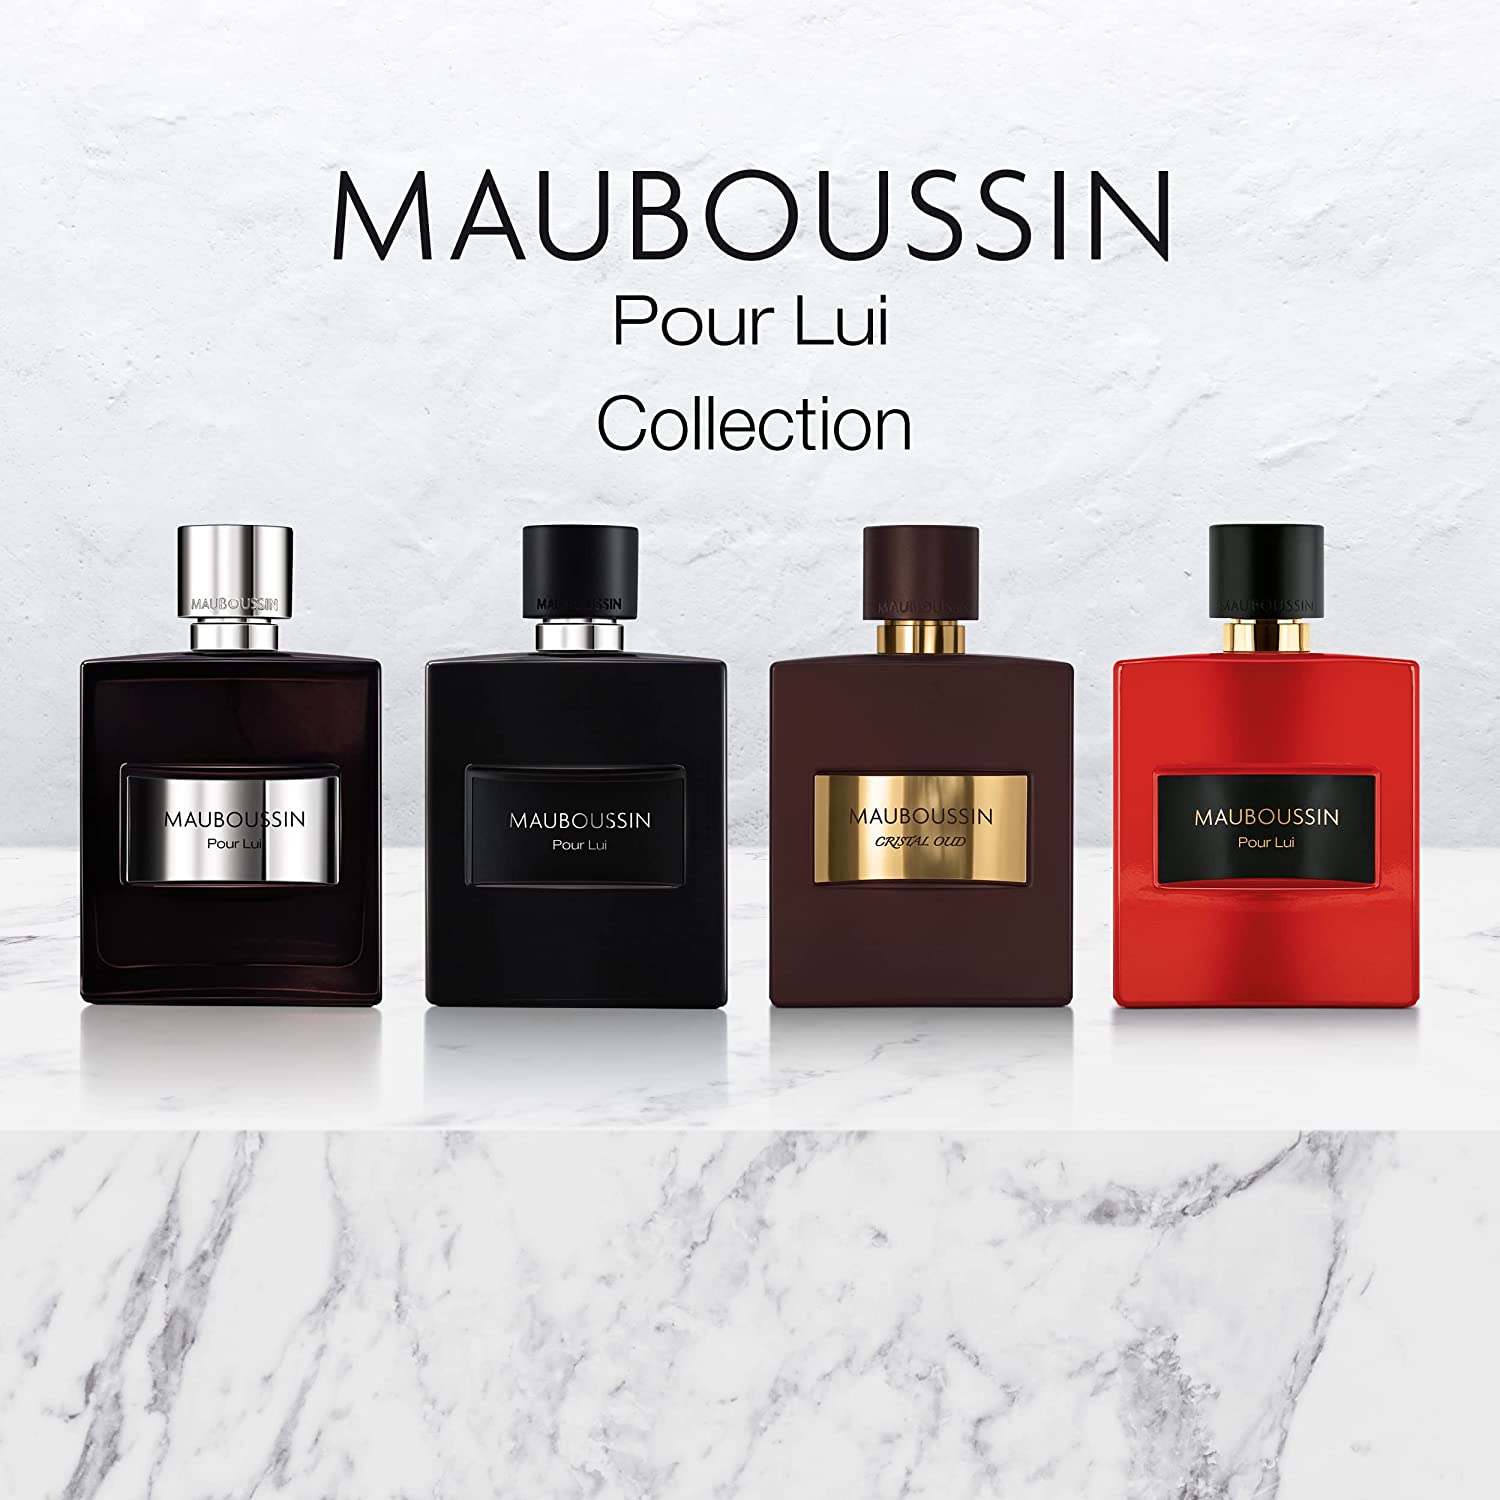 Mauboussin Pour Lui in Red